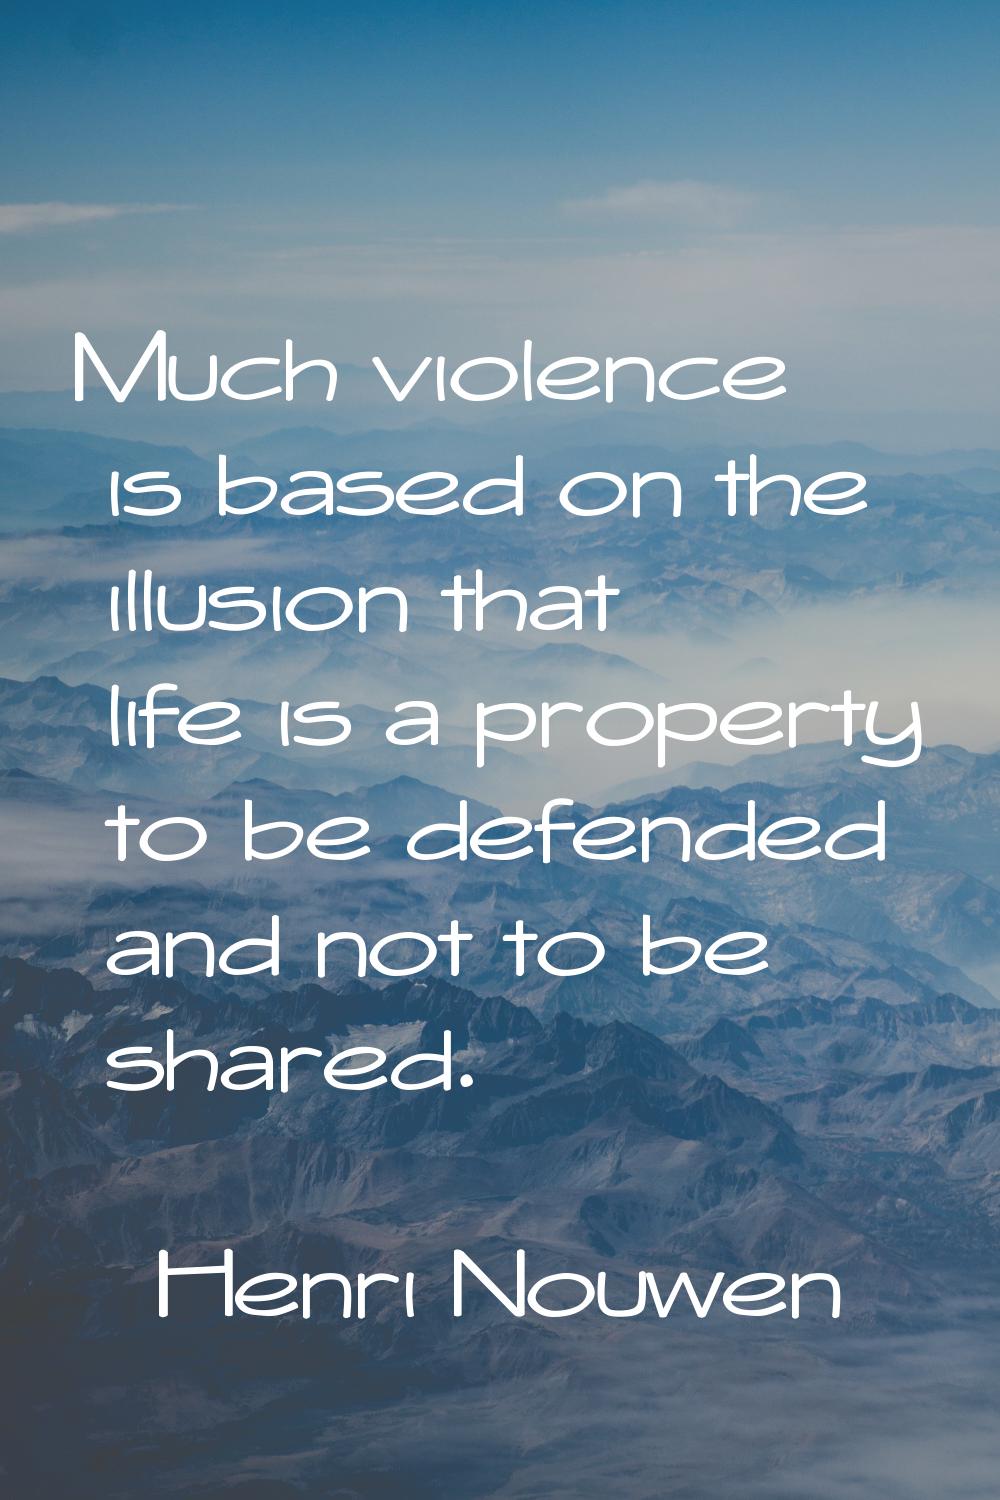 Much violence is based on the illusion that life is a property to be defended and not to be shared.